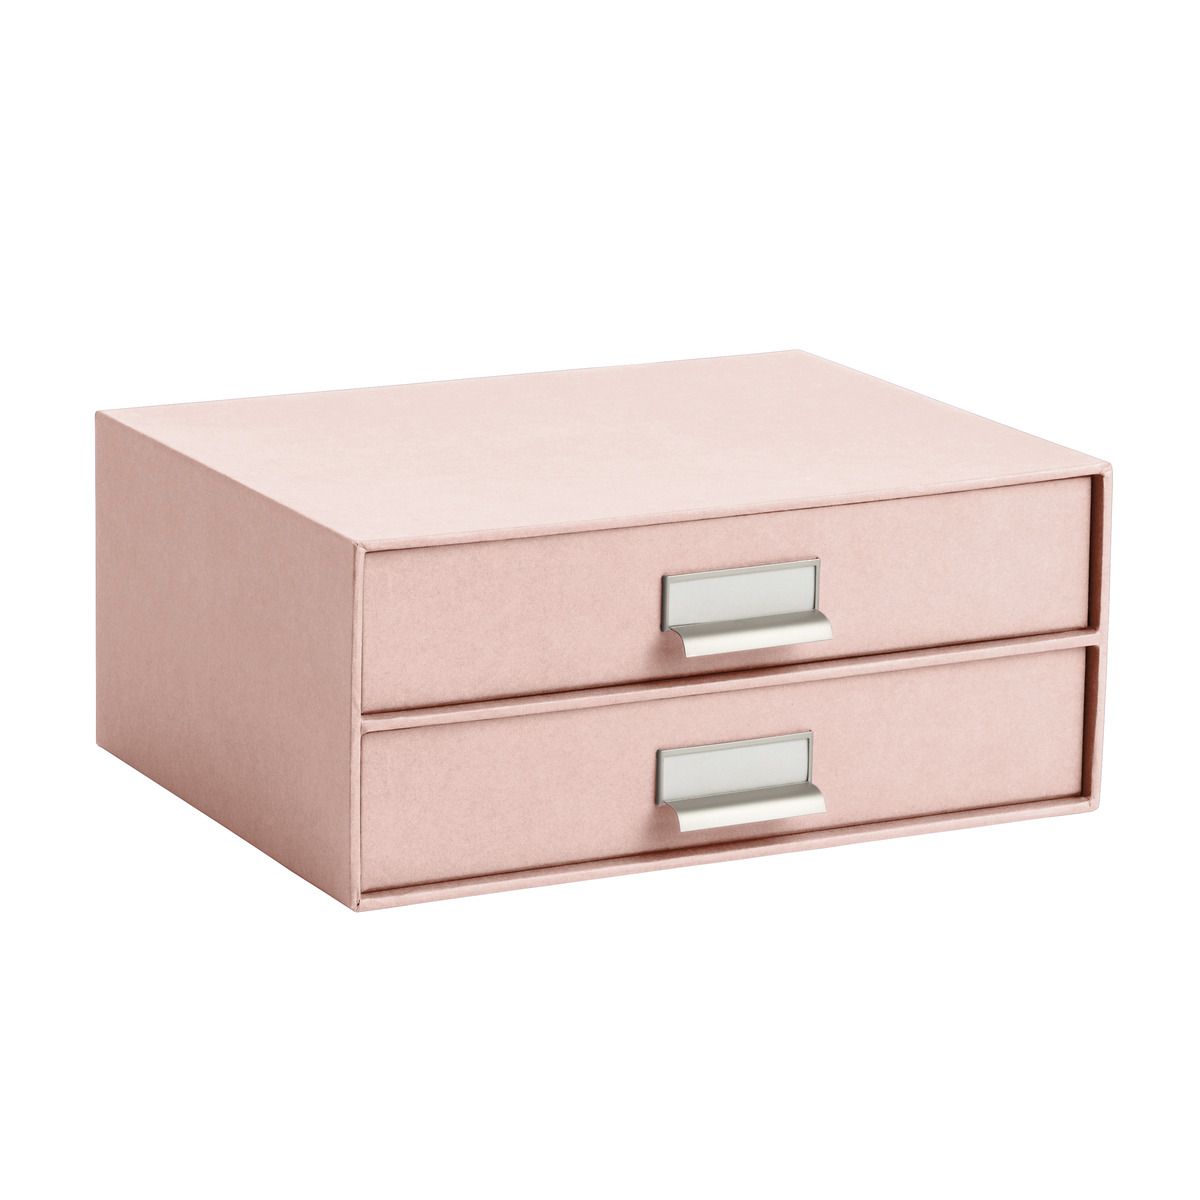 Bigso Stockholm Paper Drawers Blush | The Container Store